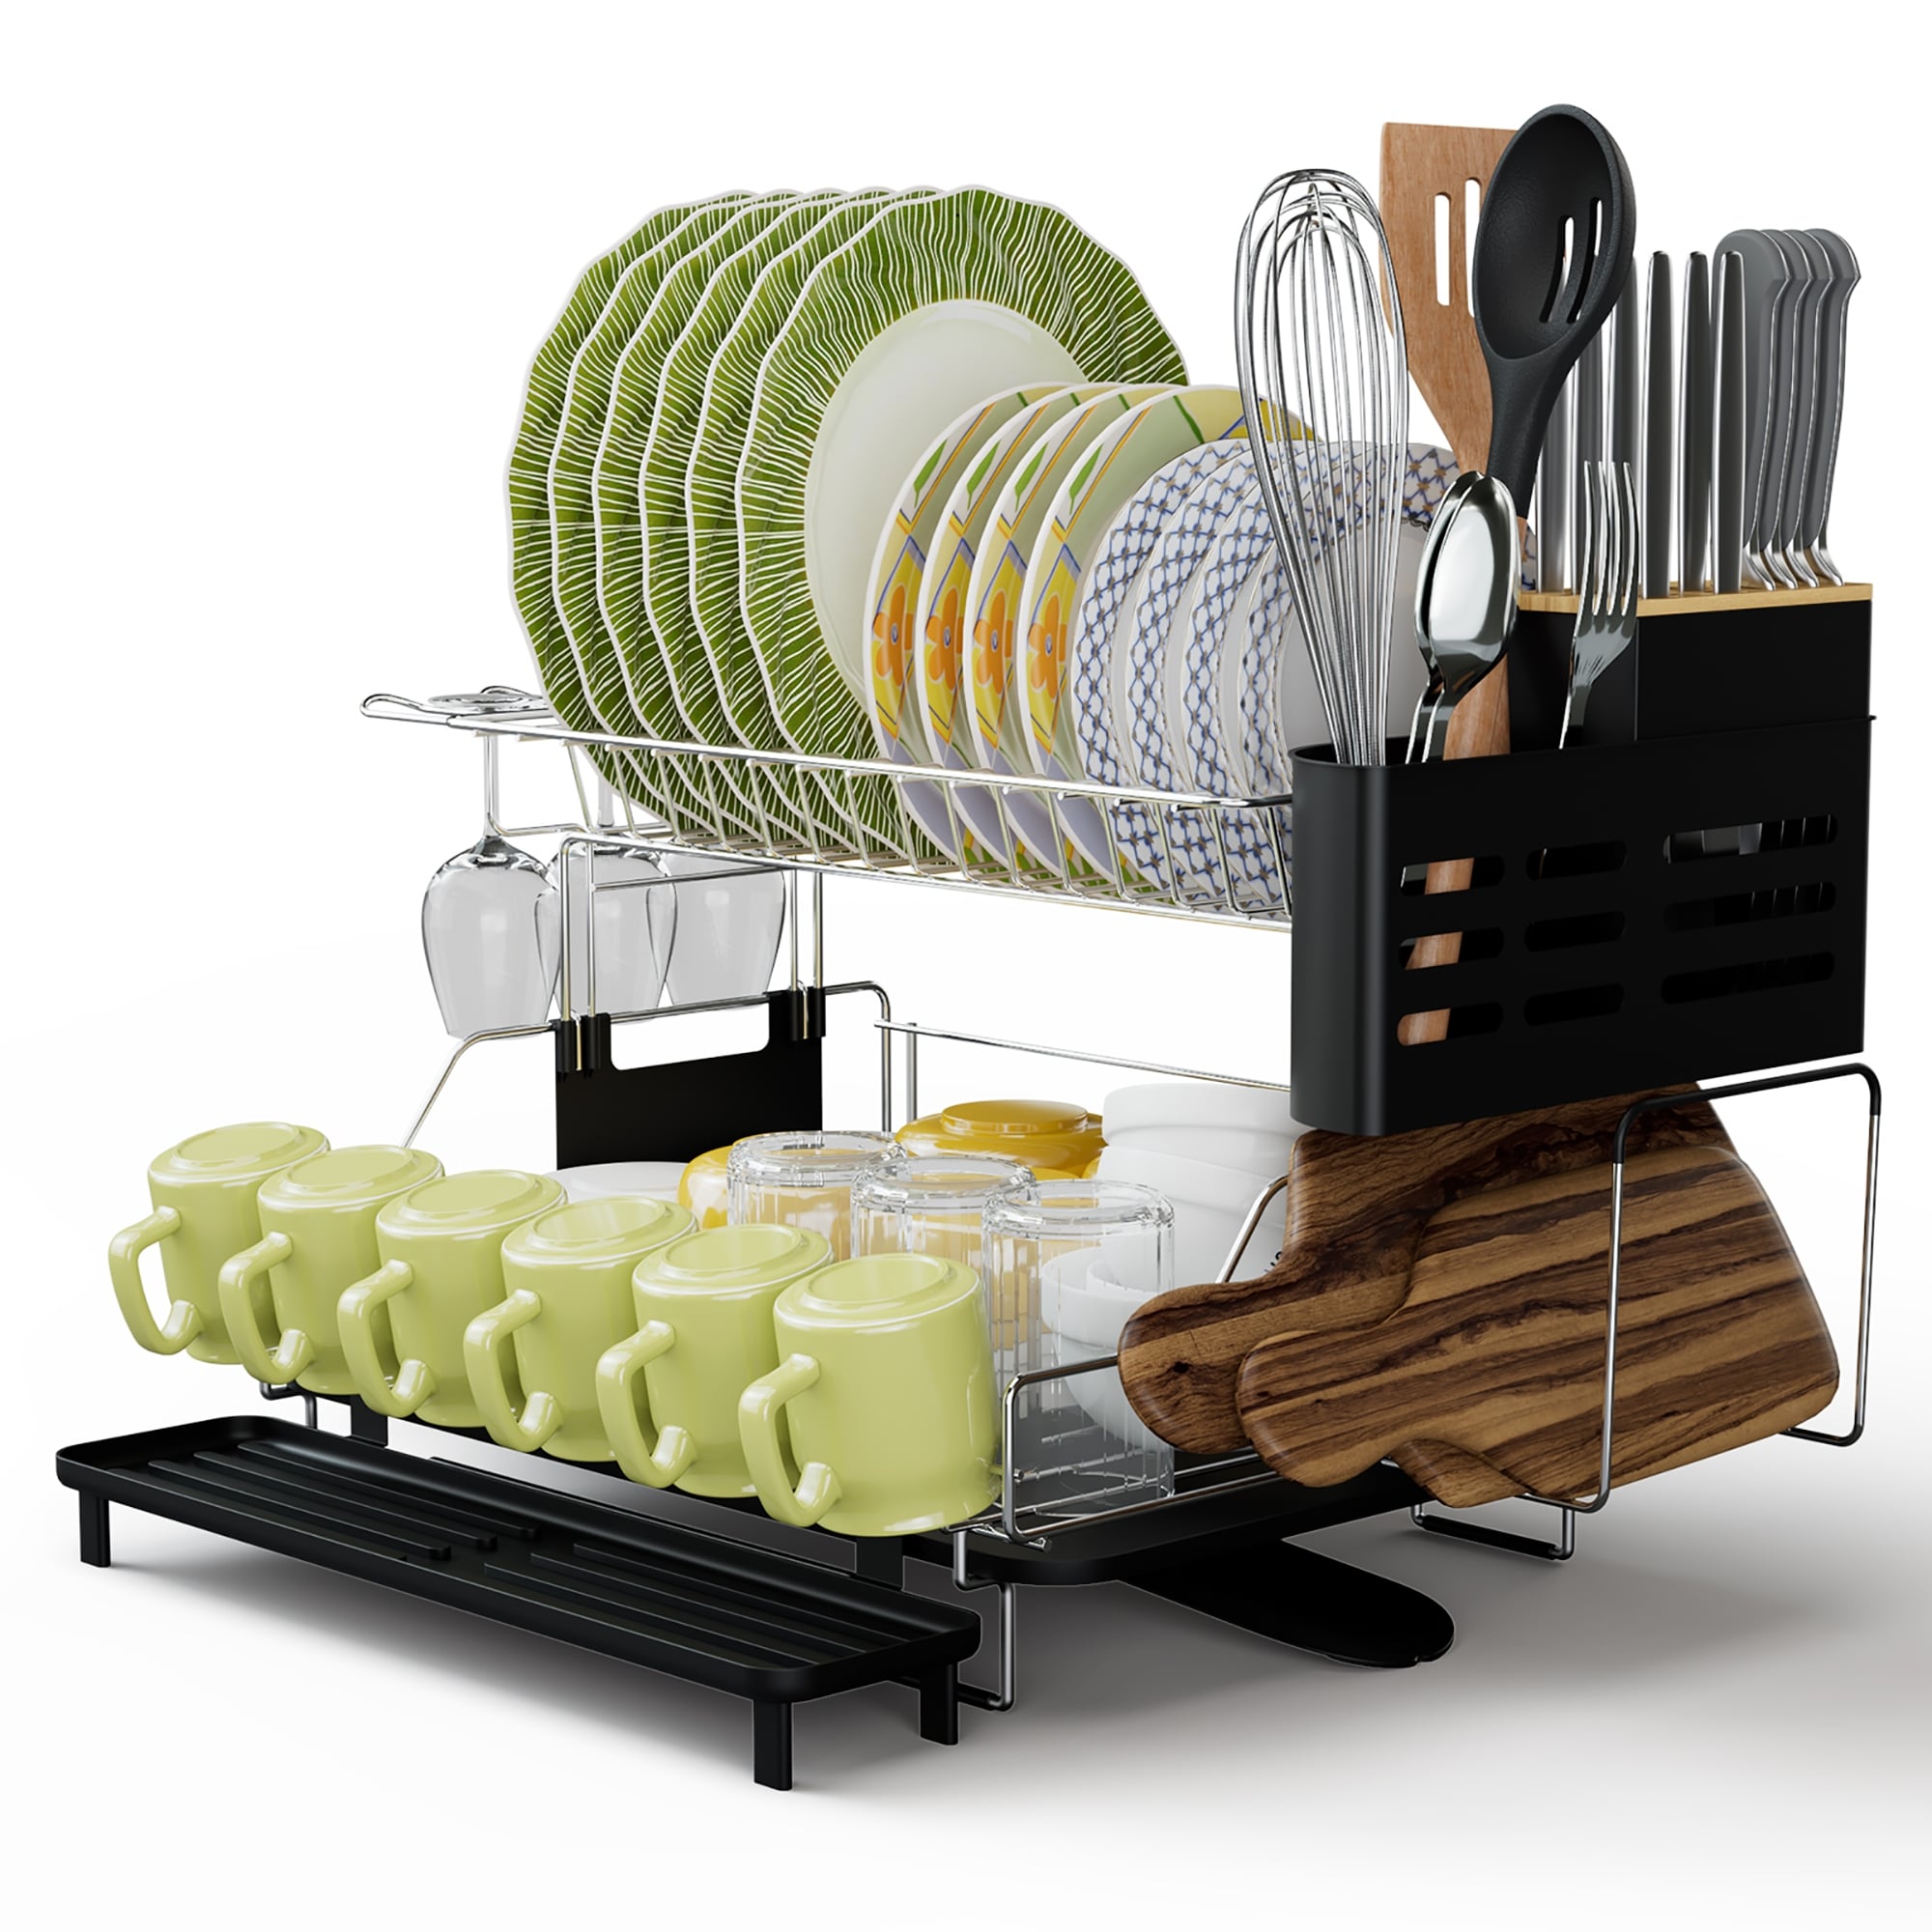 https://ak1.ostkcdn.com/images/products/is/images/direct/dafeac71316412b0f96400a66820019dfb1ecc73/Dish-Drying-Rack-Detachable-2-Tier-Dish-Rack-with-Drainboard.jpg